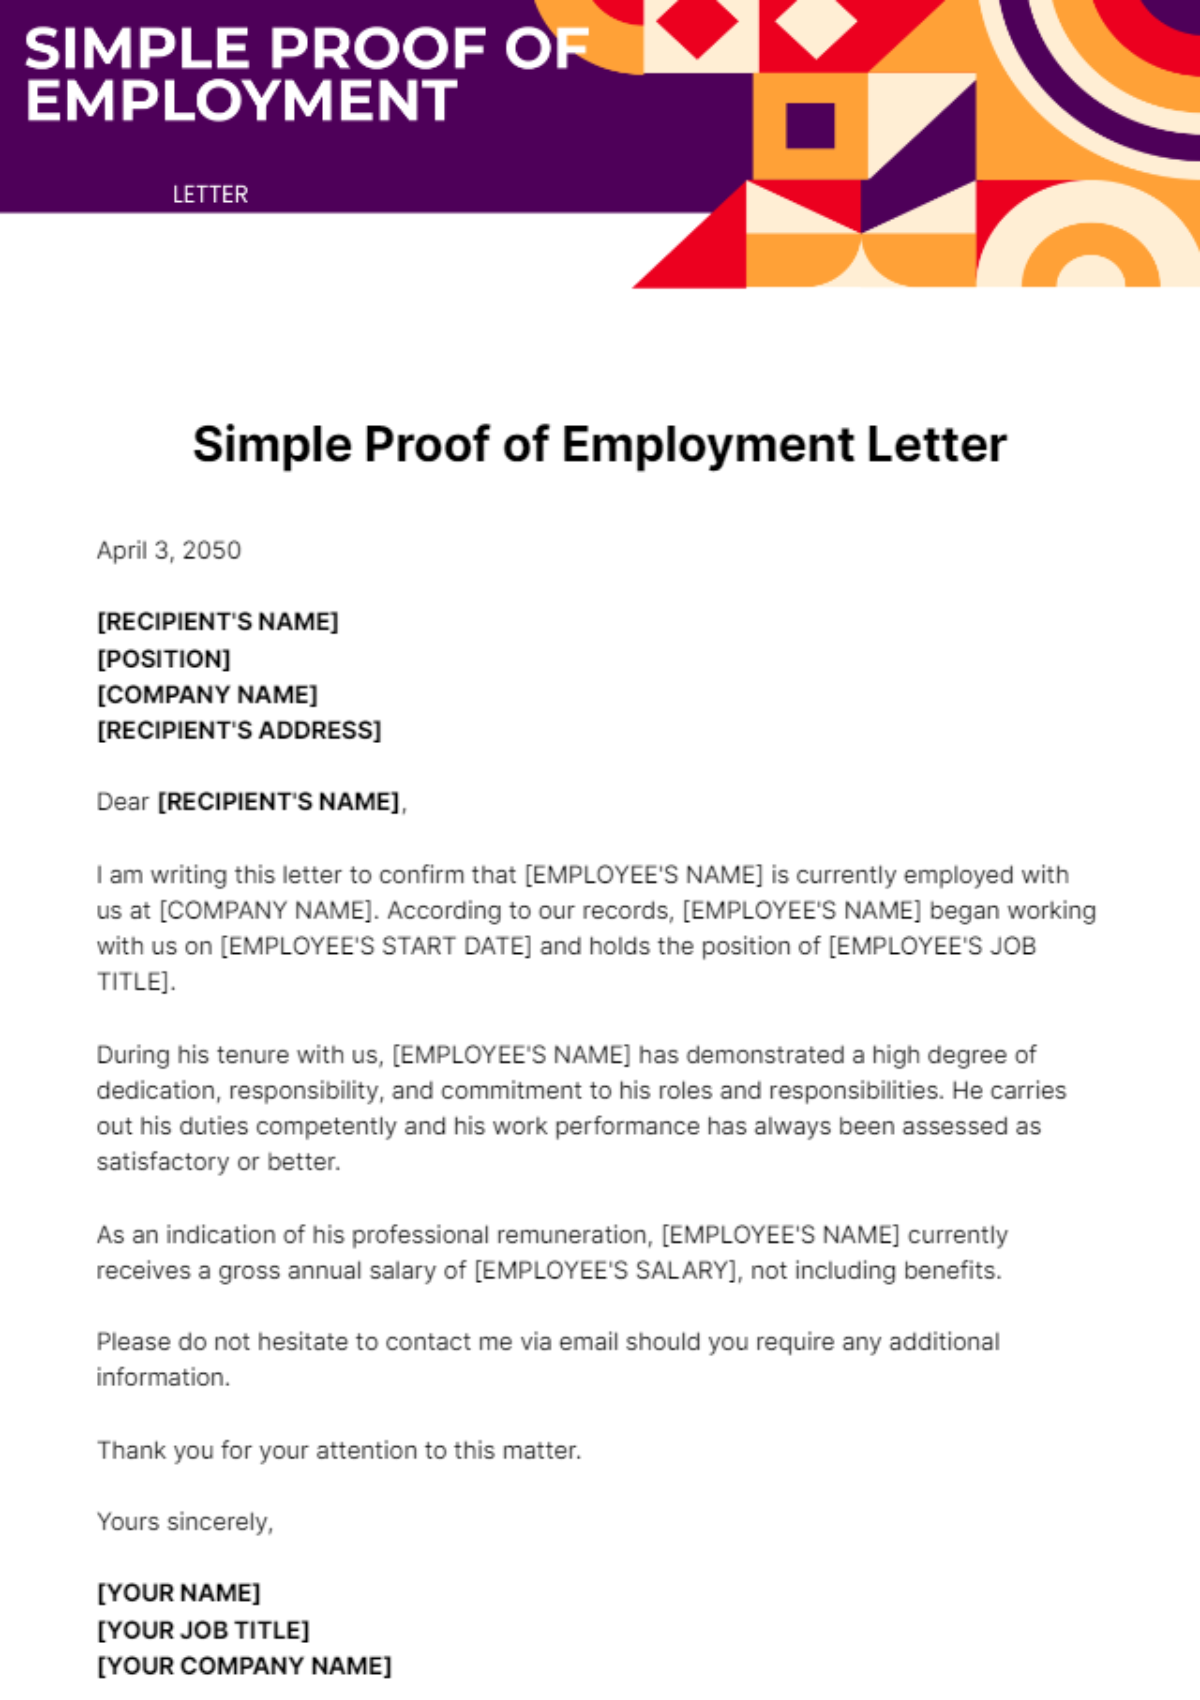 Simple Proof of Employment Letter Template